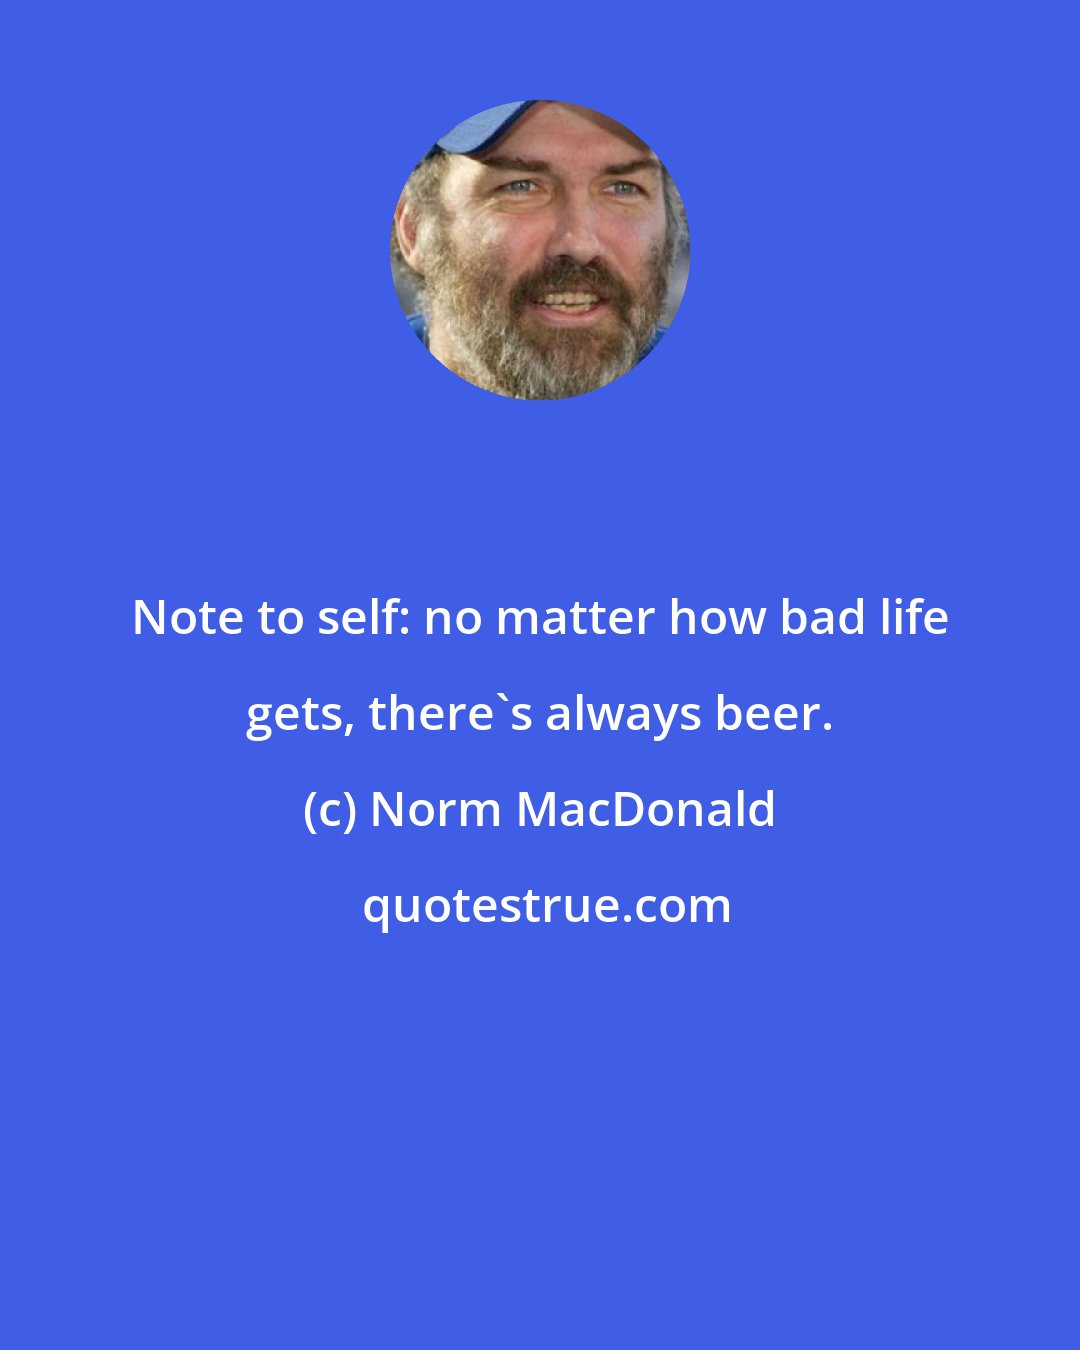 Norm MacDonald: Note to self: no matter how bad life gets, there's always beer.